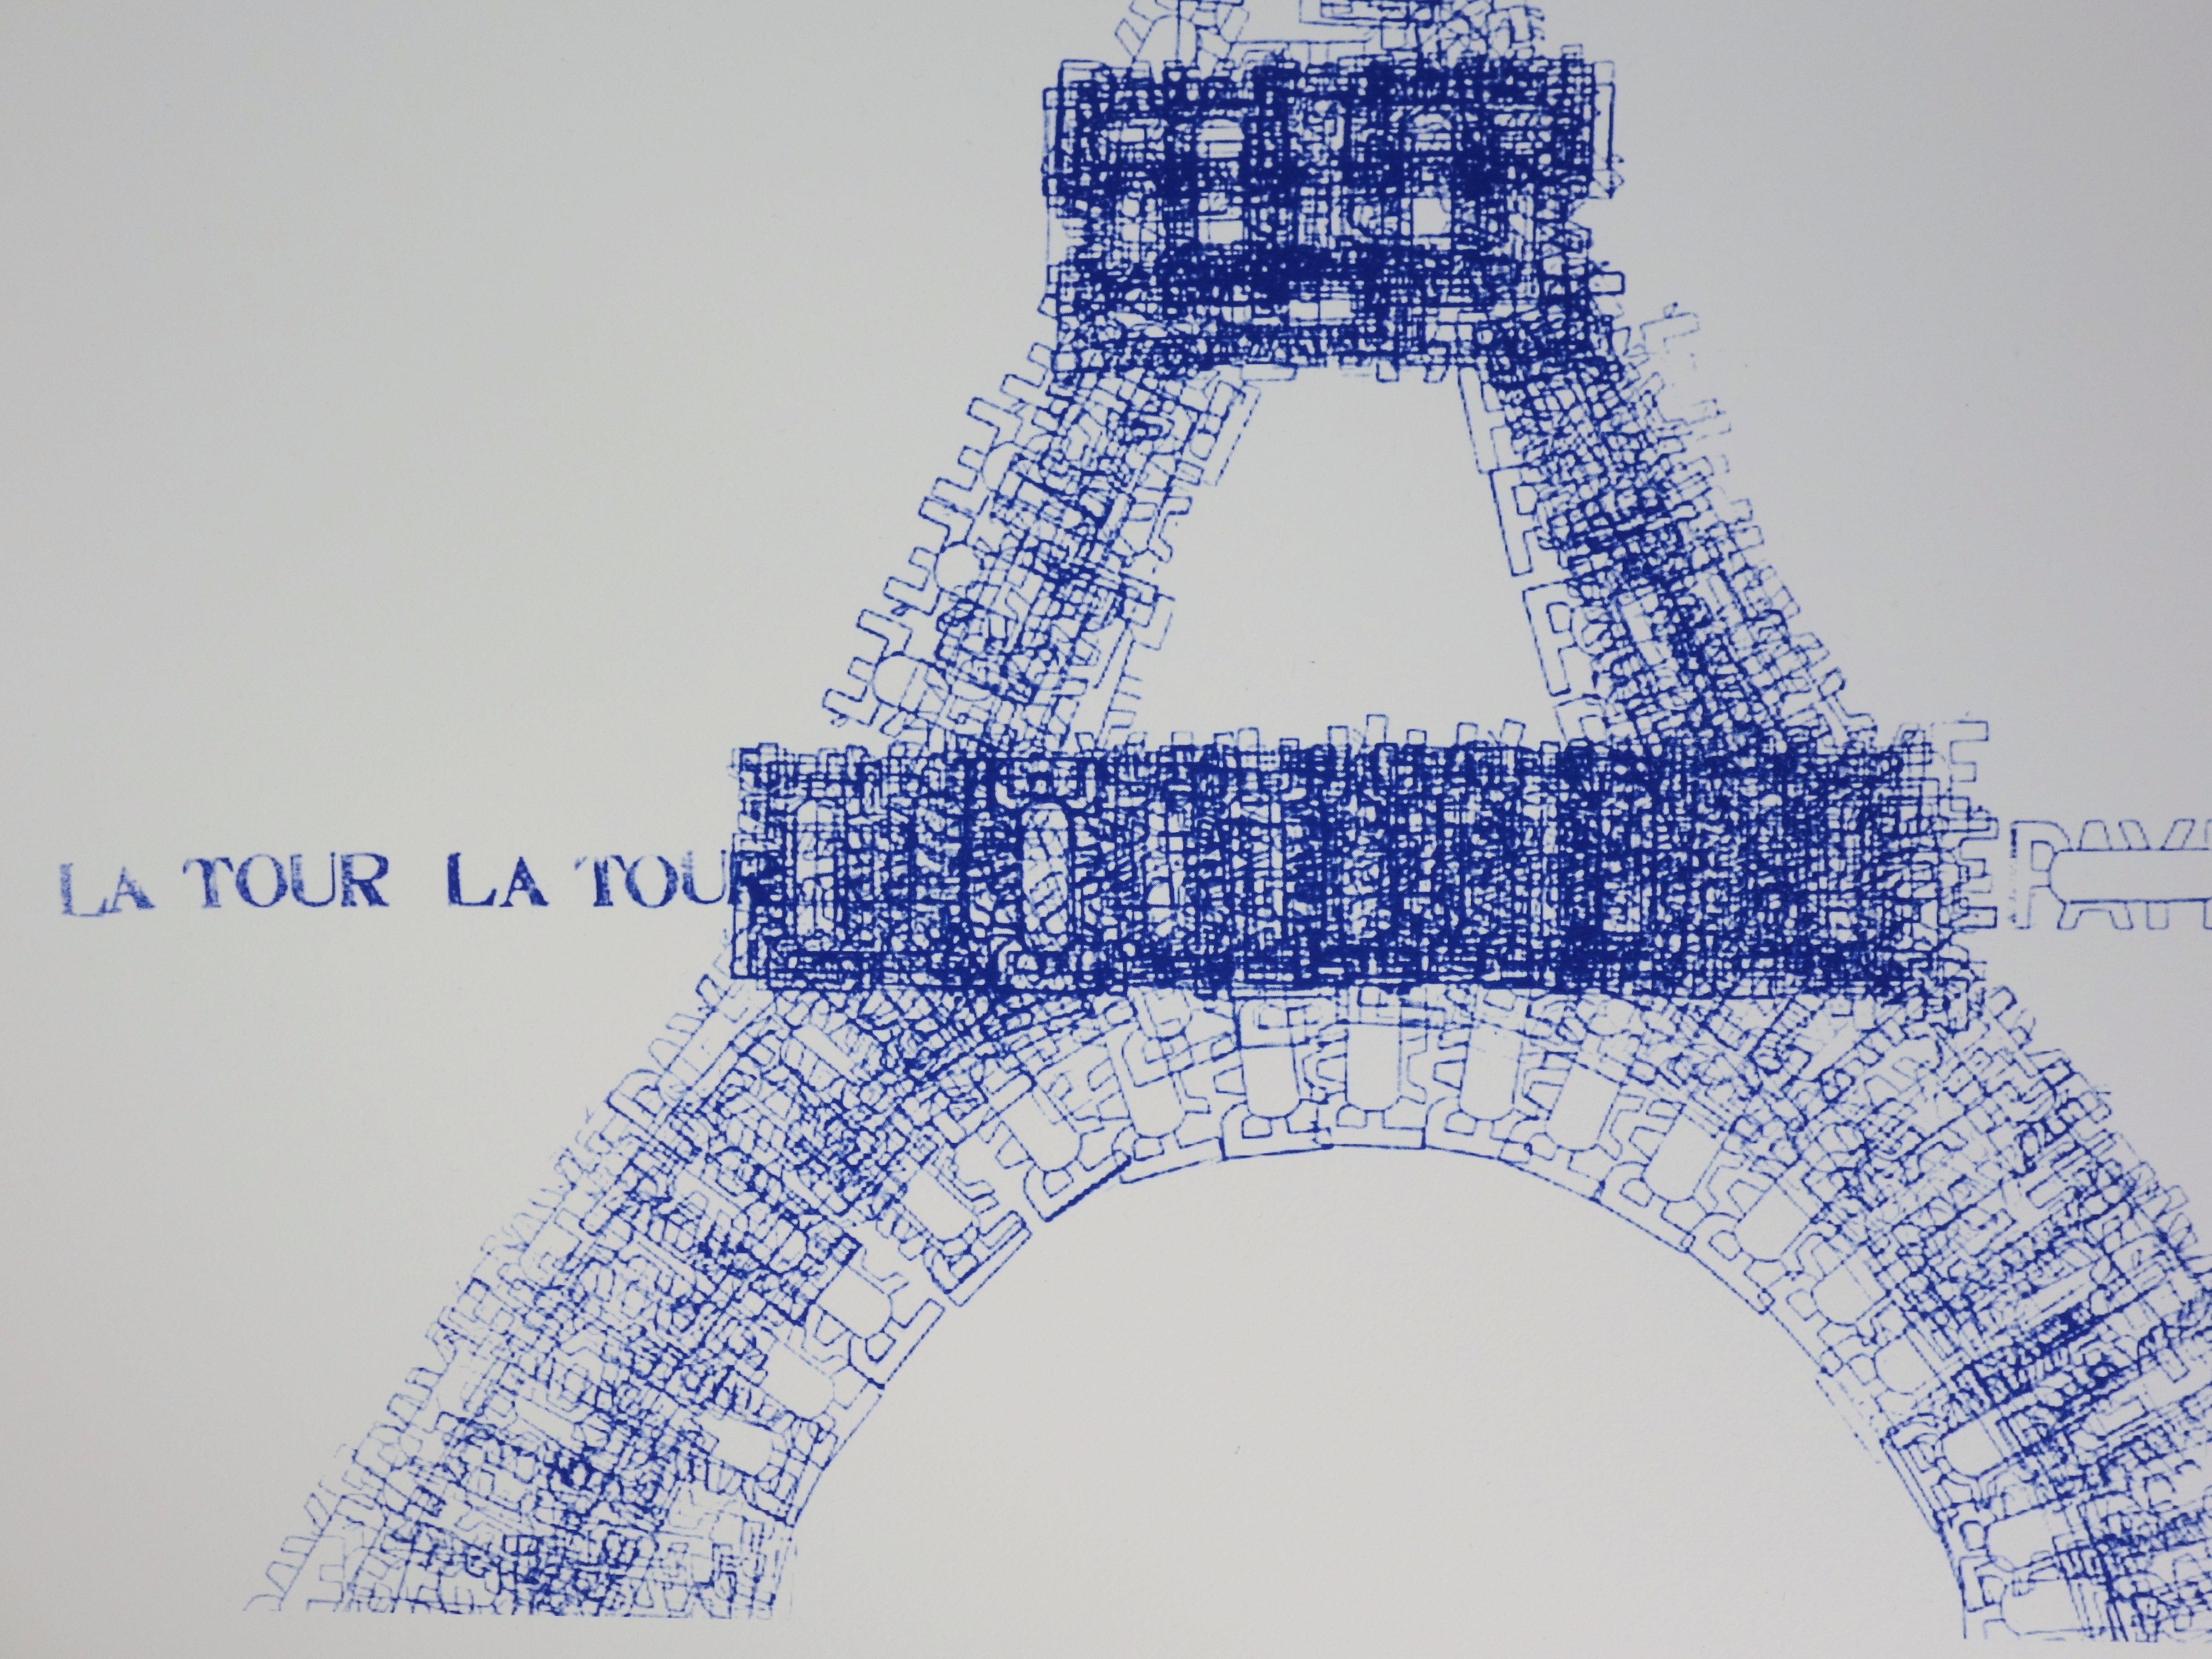 Cozette de CHARMOY (1939-)
Eiffel Tower In Payed Stamps

Screen Print
Handsigned in pencil
Limited to 50 copies and a few EA (here an EA proof)
On Arches vellum 88 x 60 cm (c. 35 x 24 inch)

Excellent condition